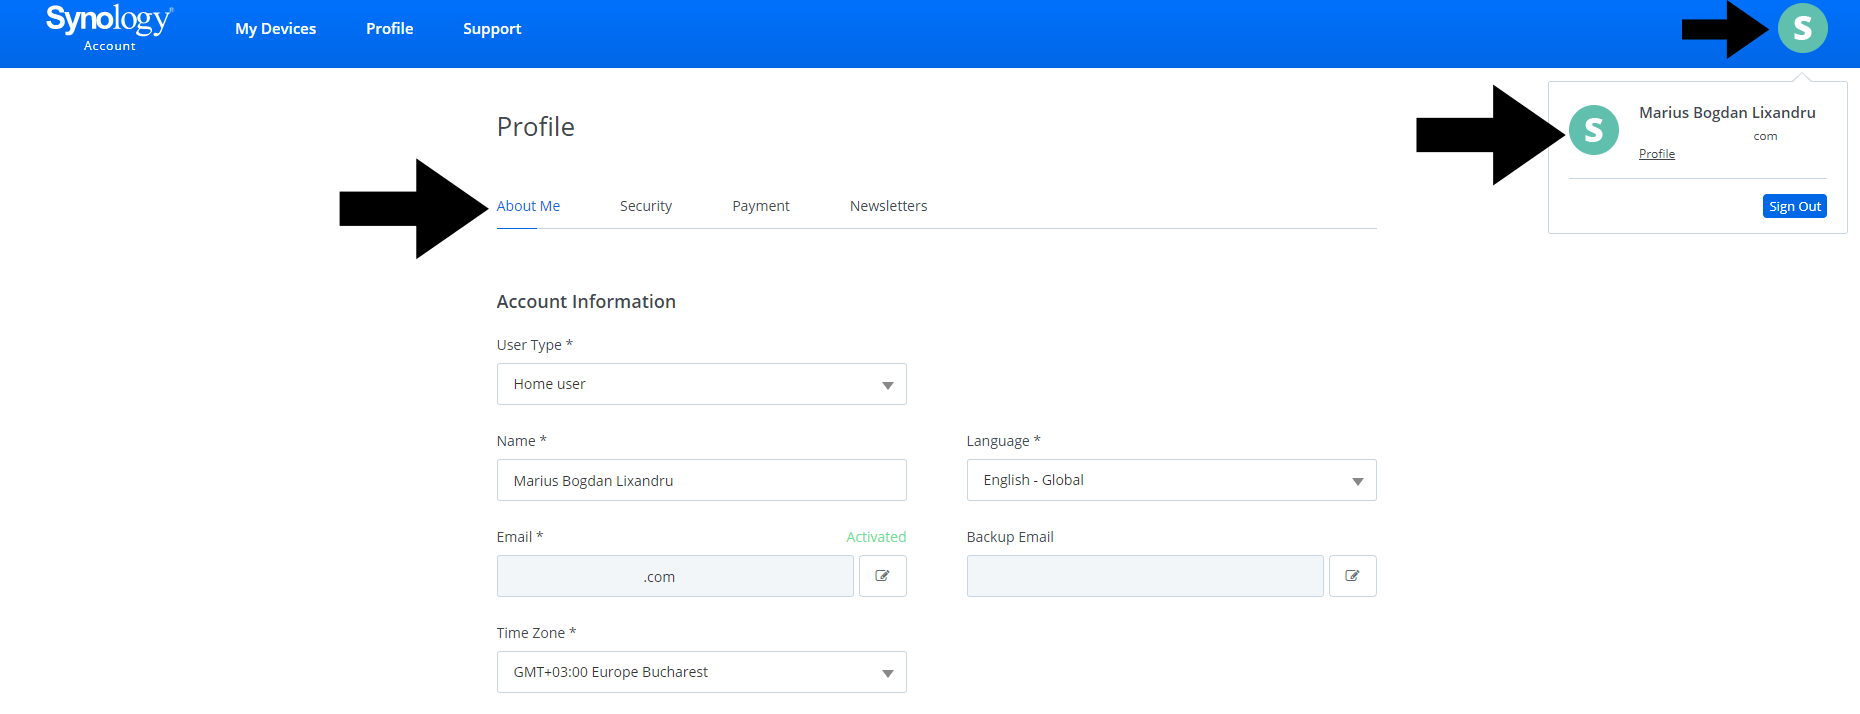 Synology account no profile picture